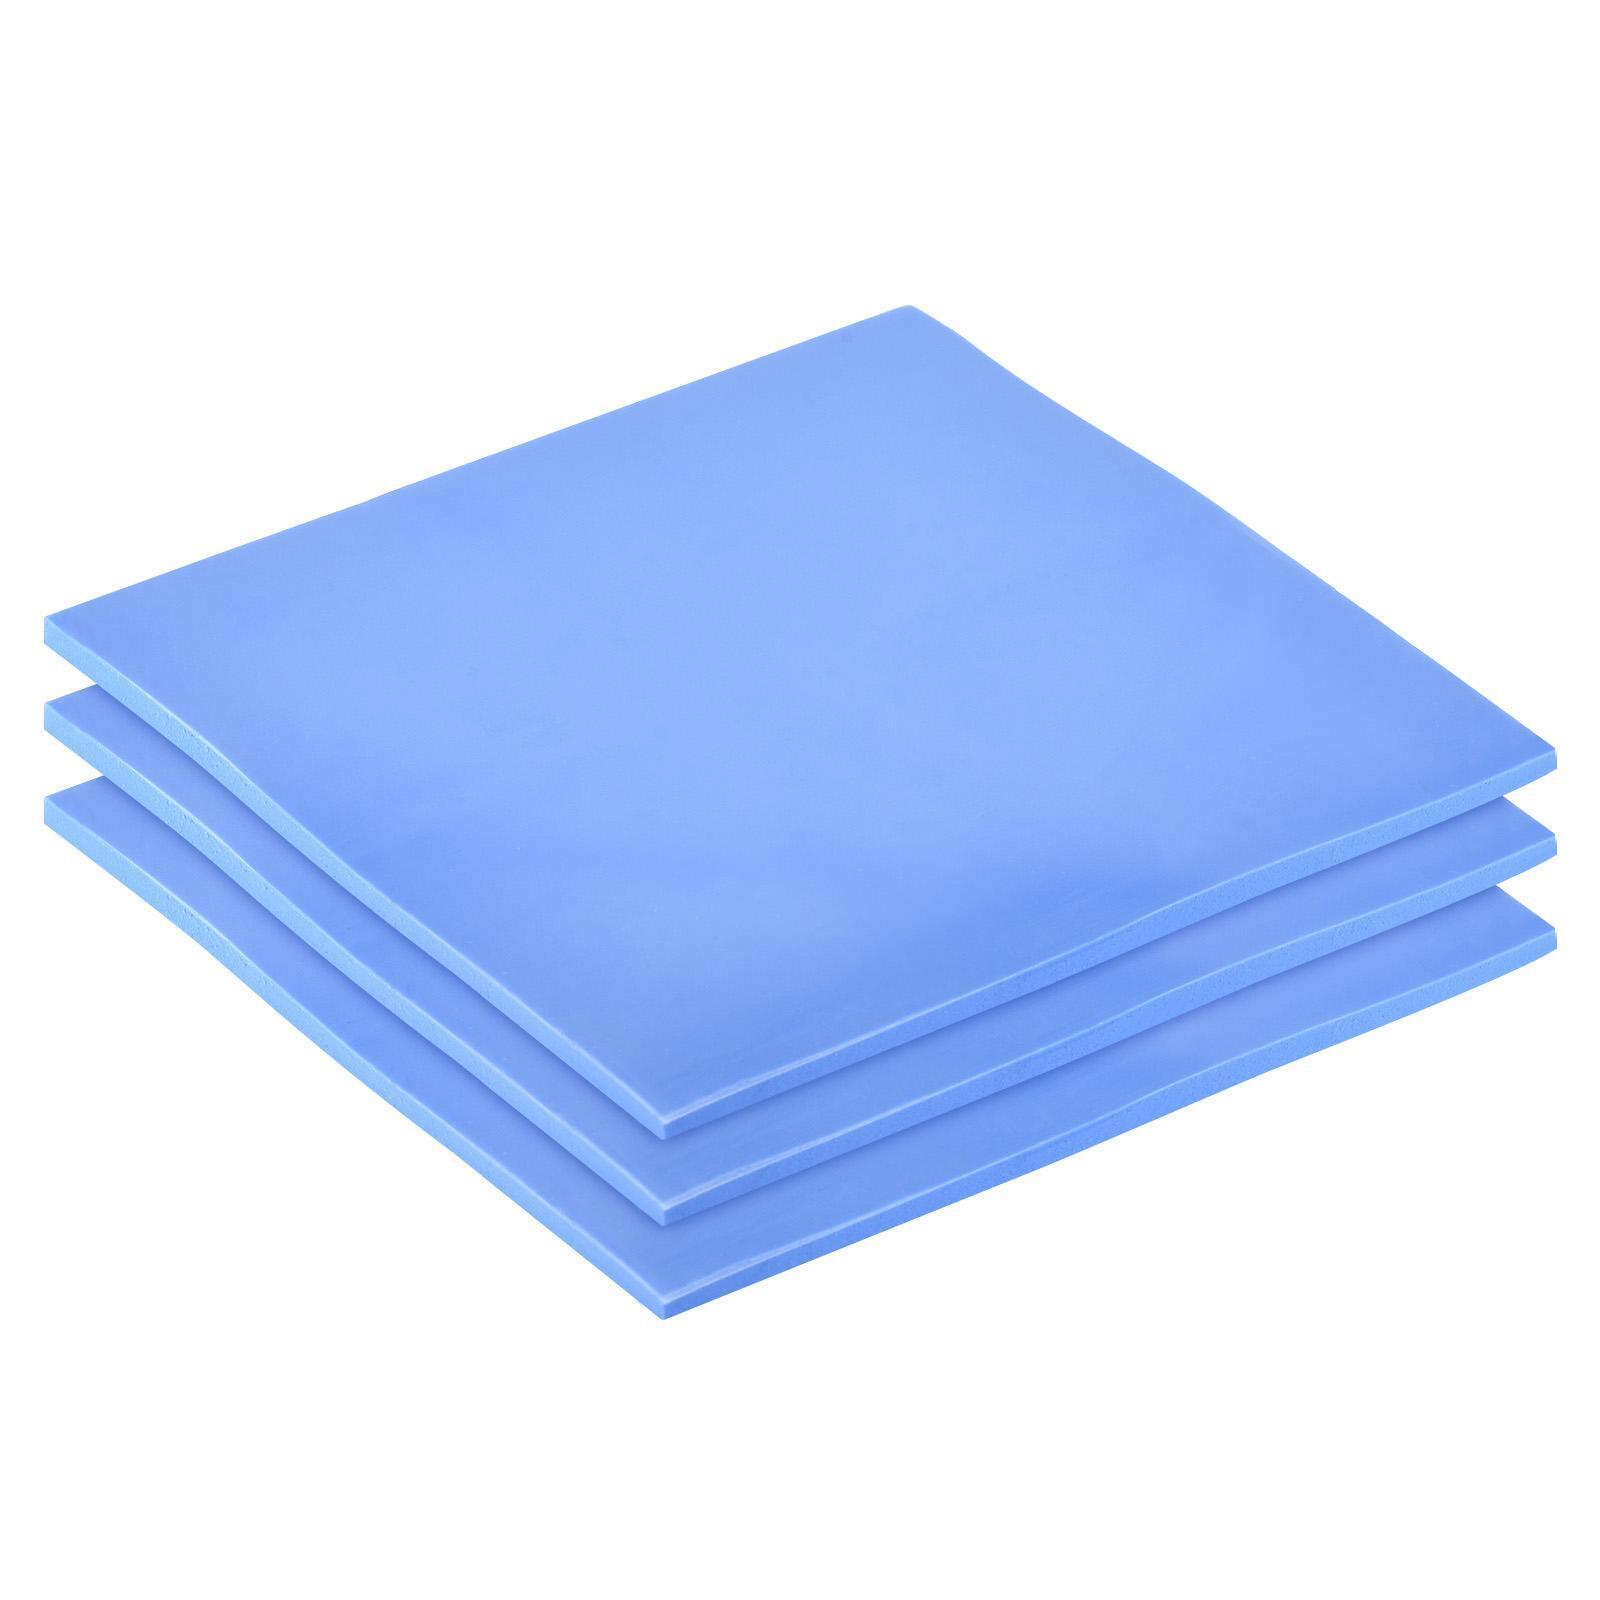 Thermal Pad Heat Conduction Silicone Pads 100 x 100 x 2.5 mm 1.5W Blue 3pcs